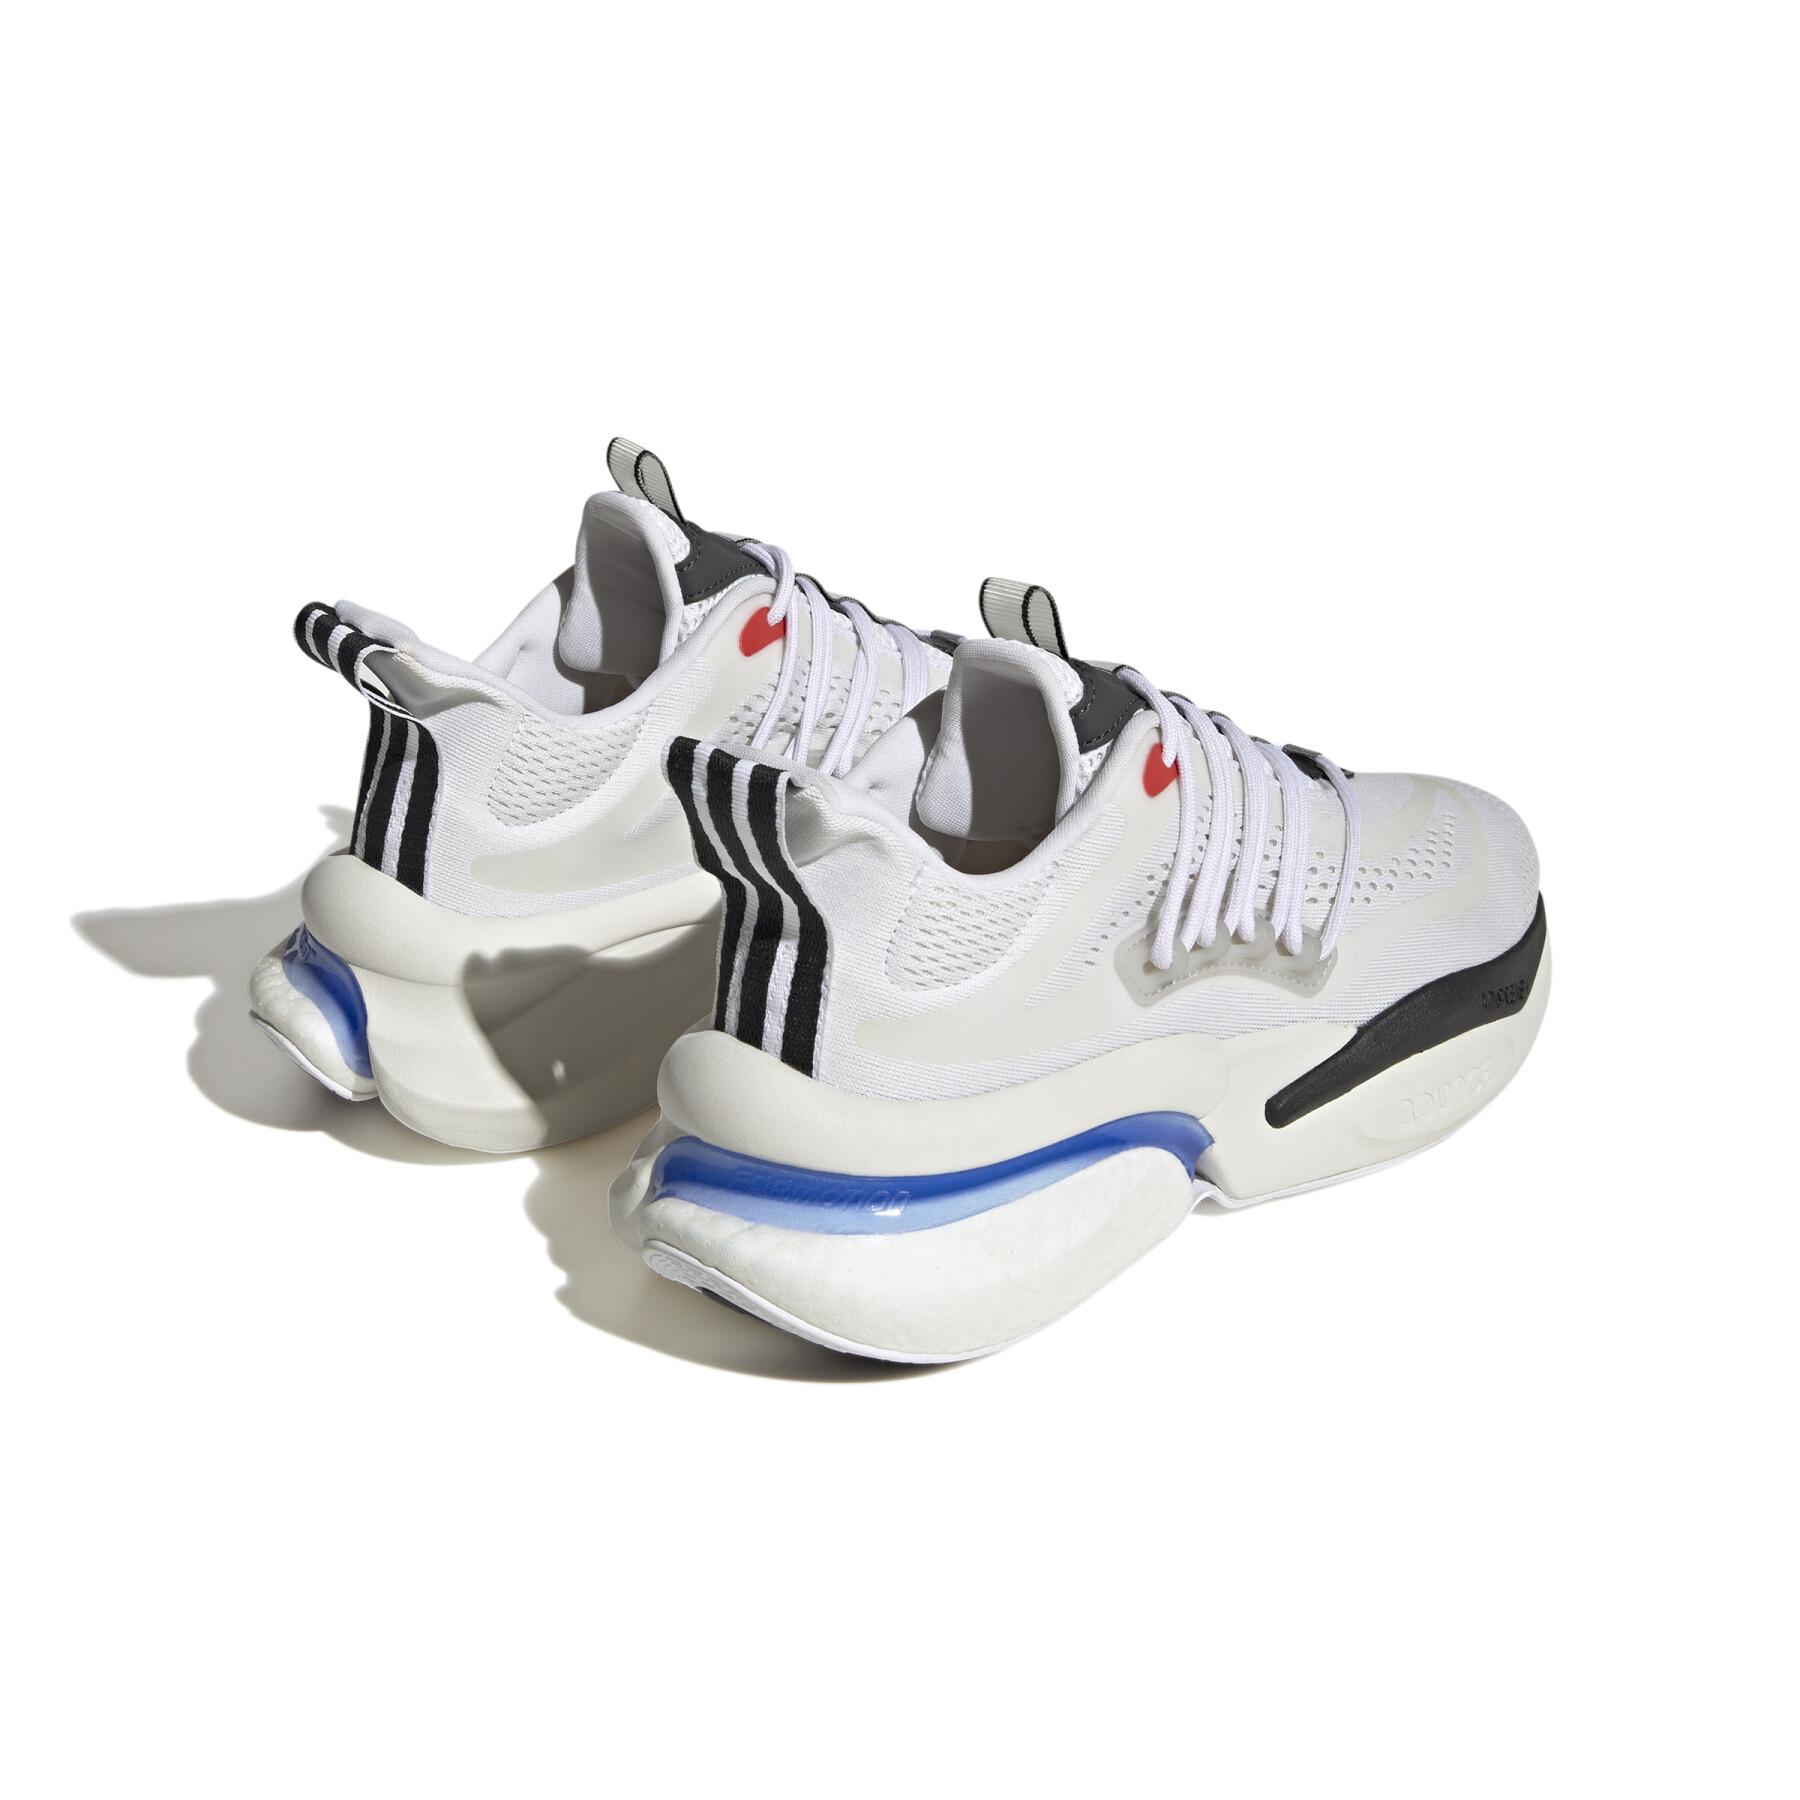 Running shoes adidas Alphaboost V1 Boost